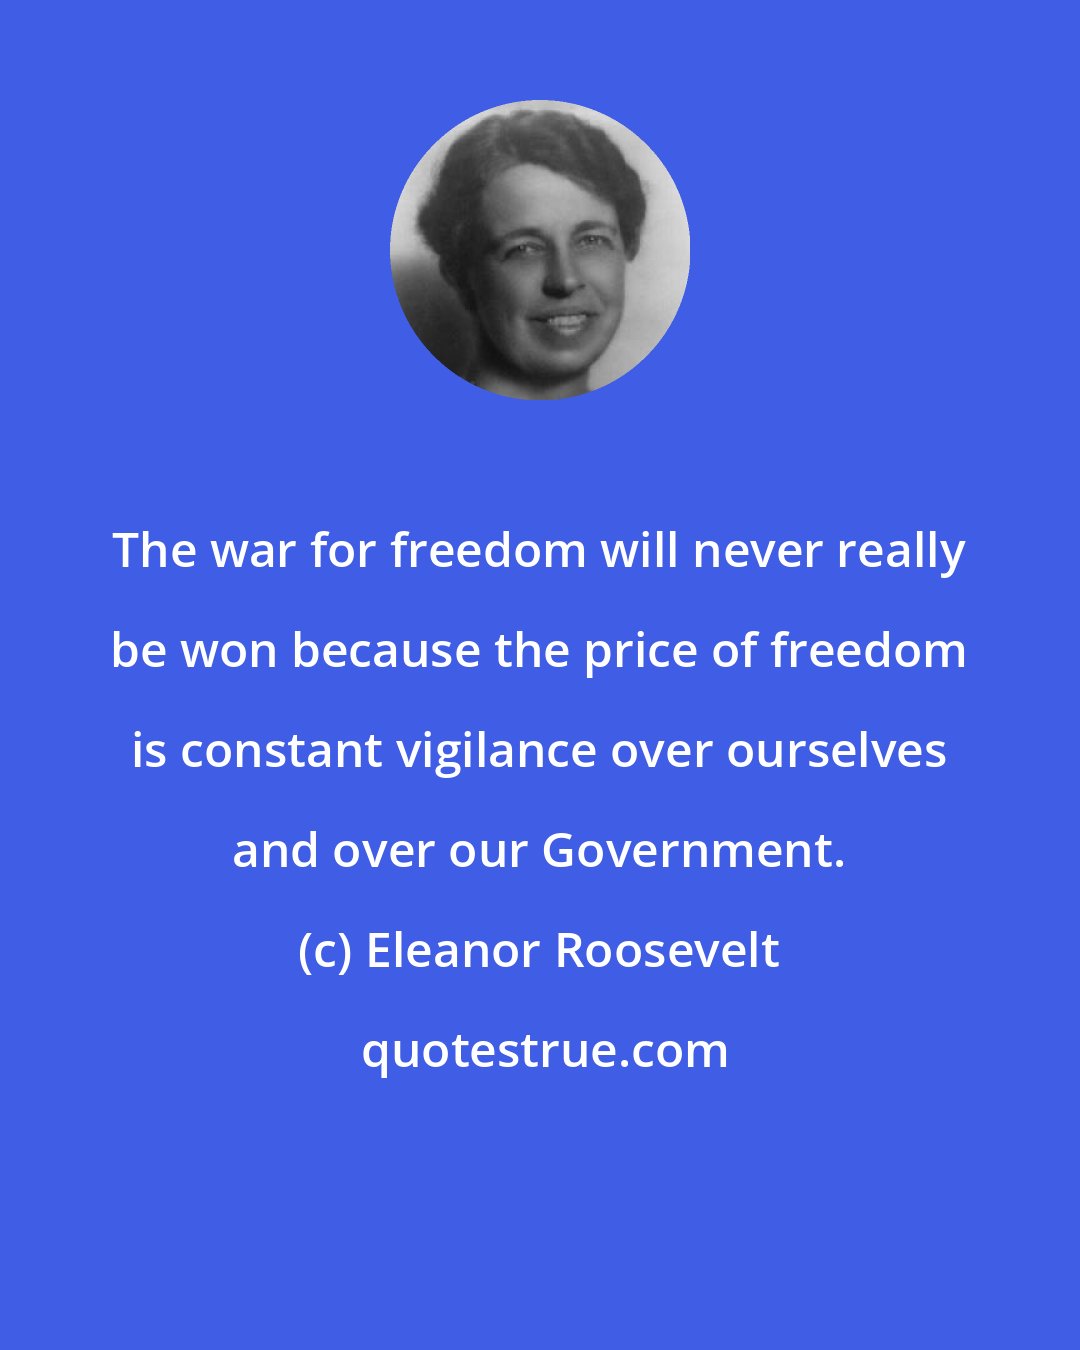 Eleanor Roosevelt: The war for freedom will never really be won because the price of freedom is constant vigilance over ourselves and over our Government.